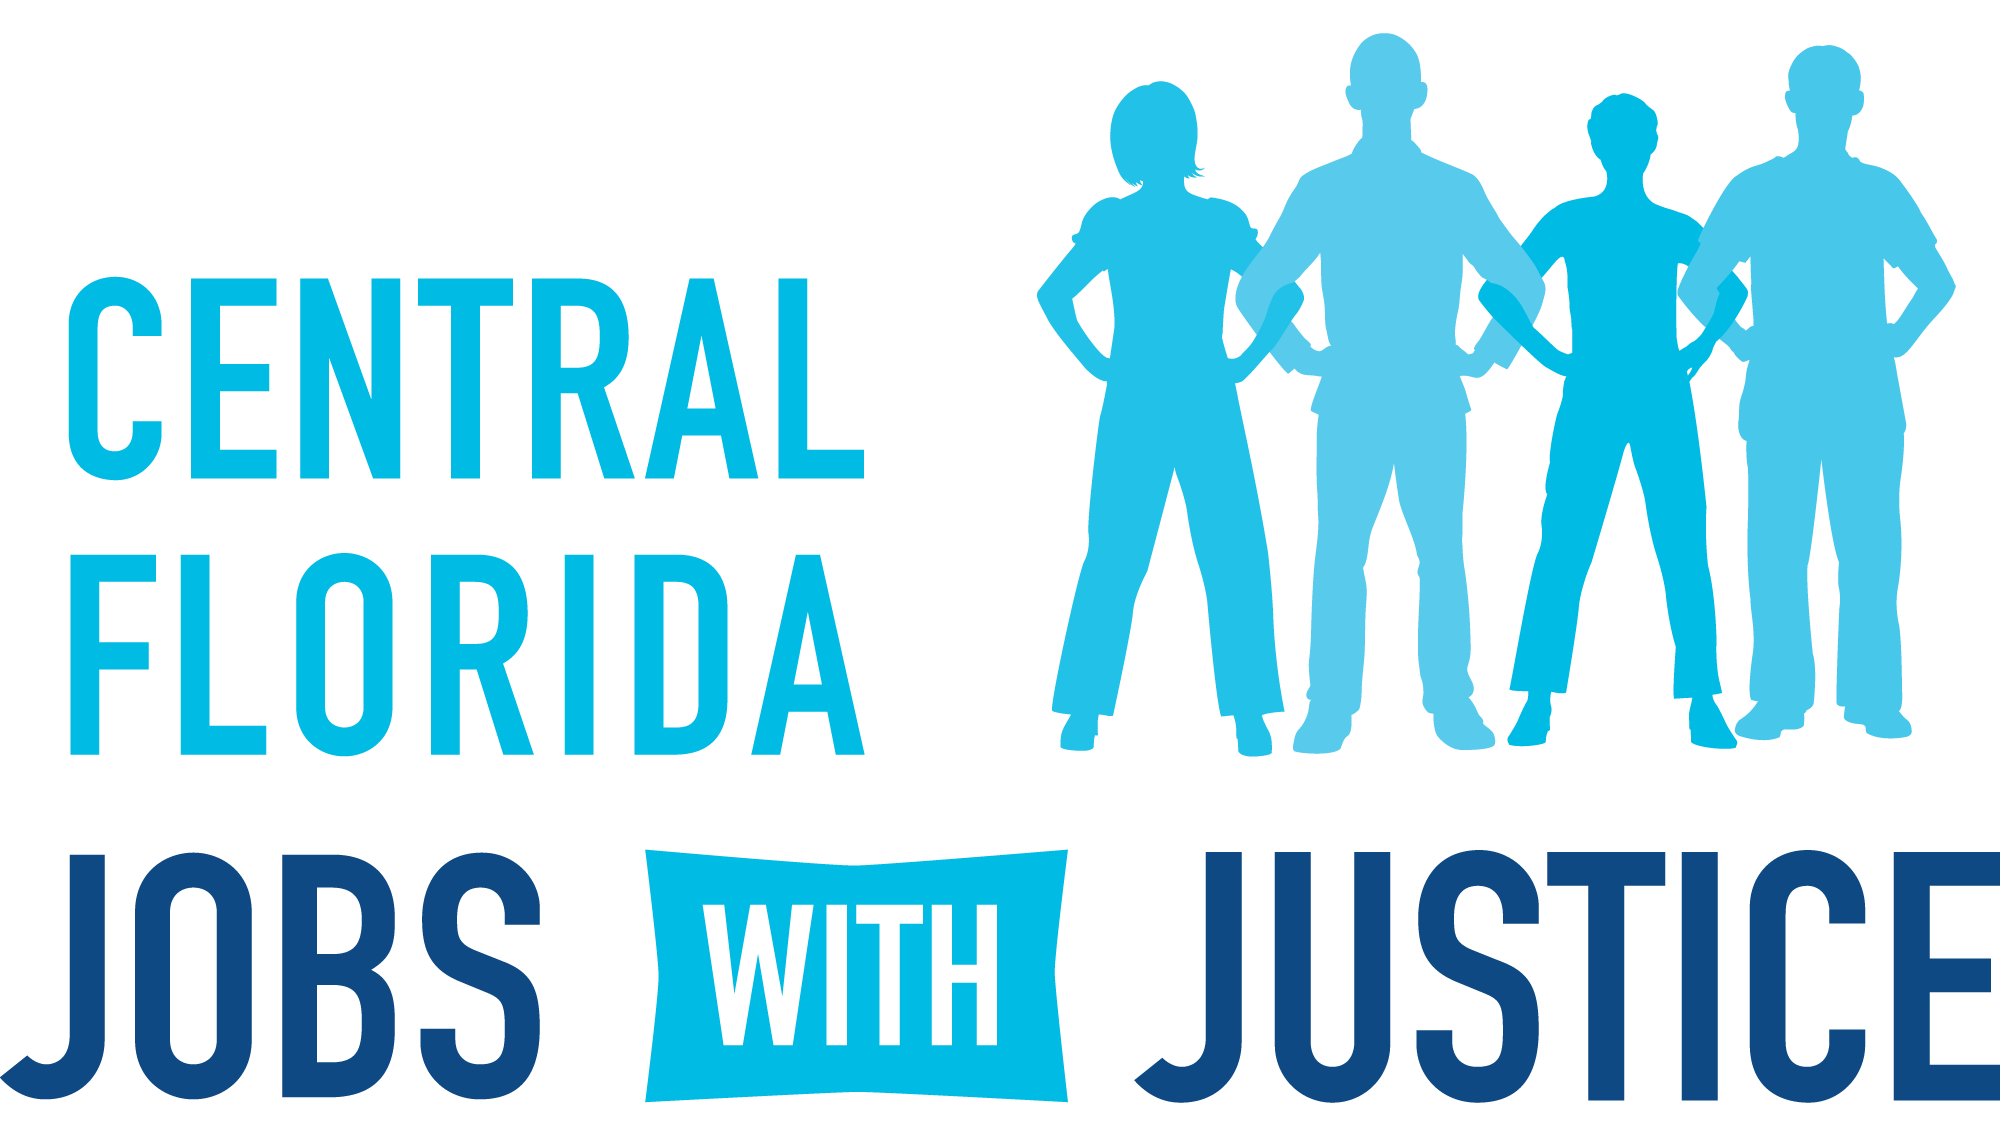 Logo for Central Florida Jobs with Justice. Features 4 blue people outlines.